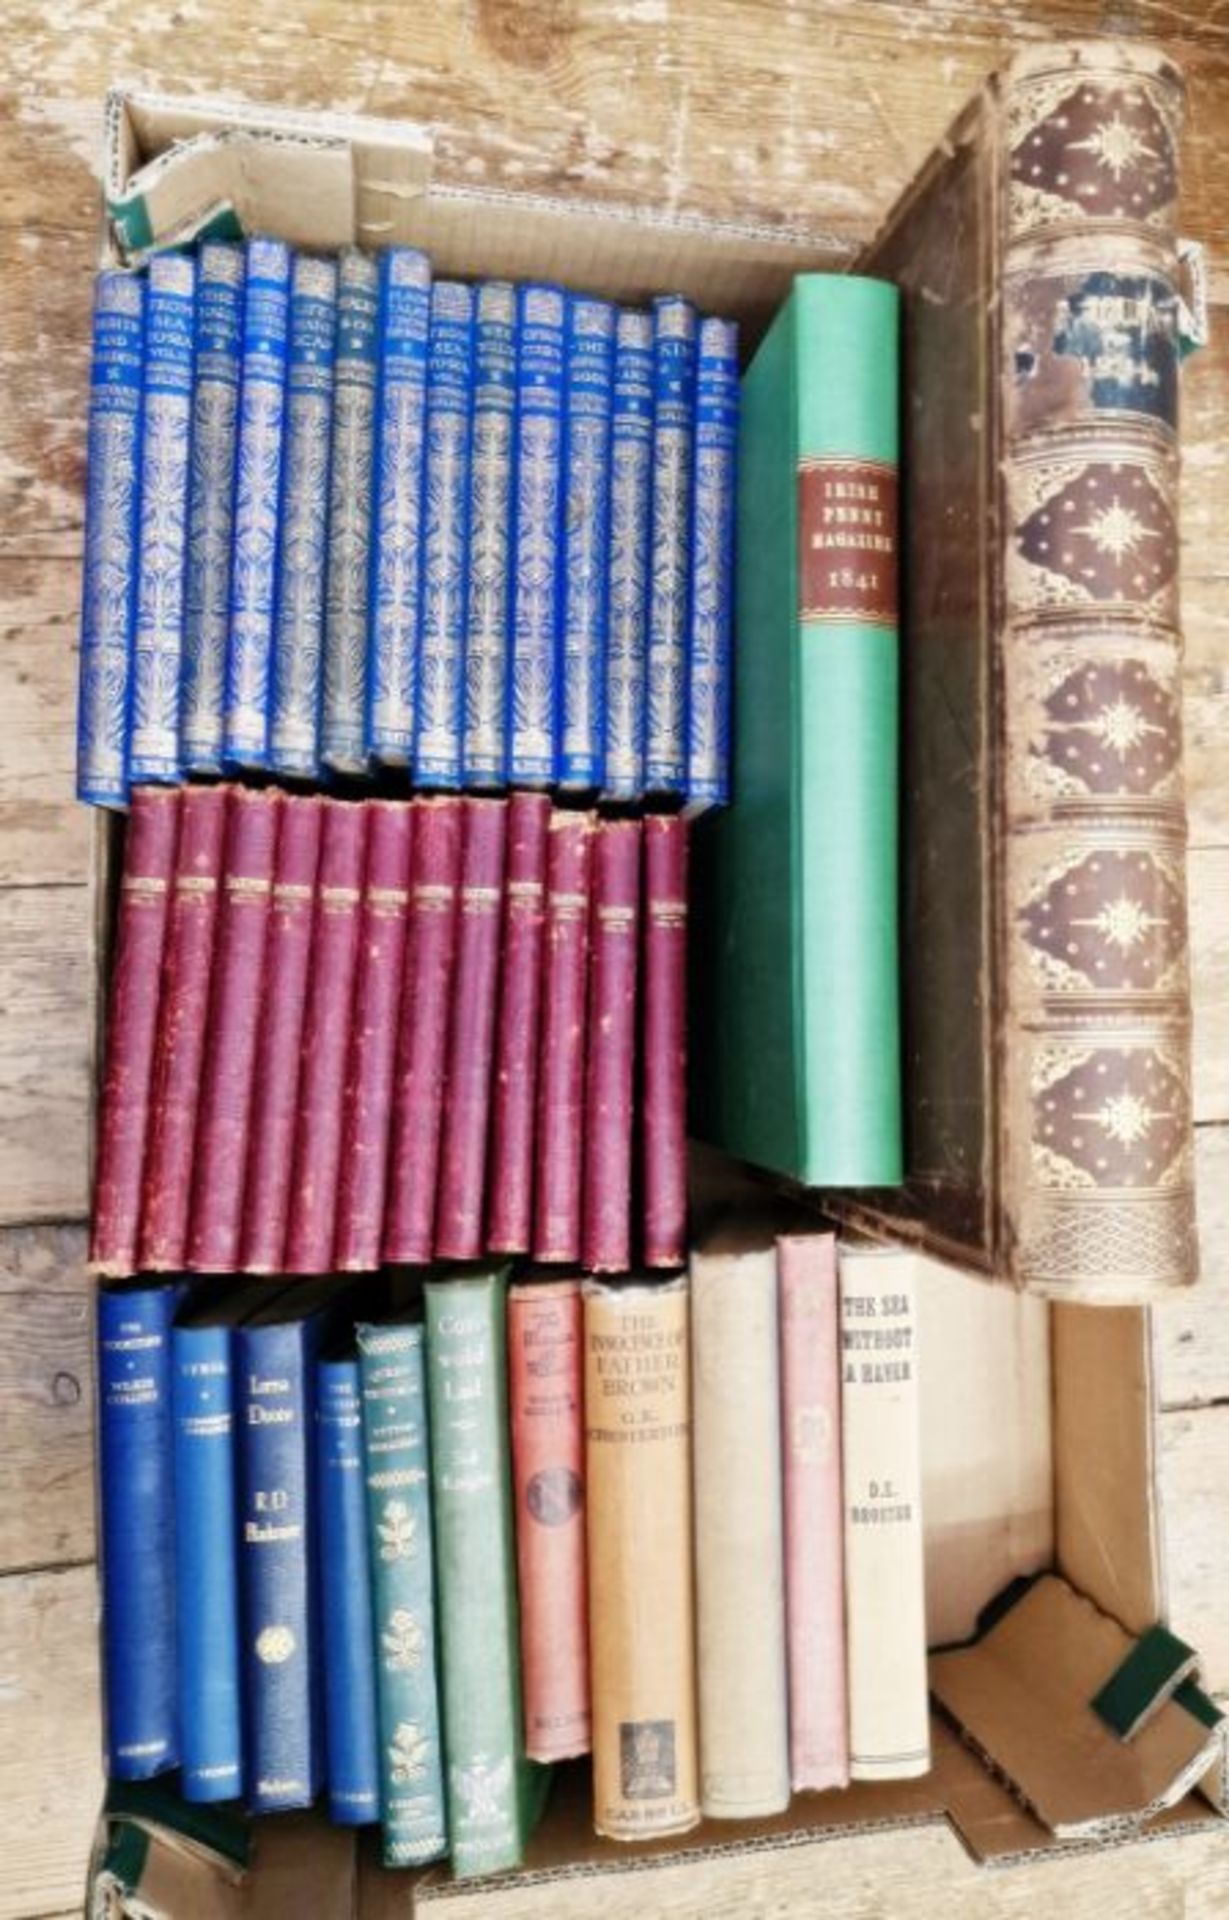 Macmillans Pocket Kipling, 14 vols, blue cloth with gilt decorations and titles to backstrip - Image 6 of 8